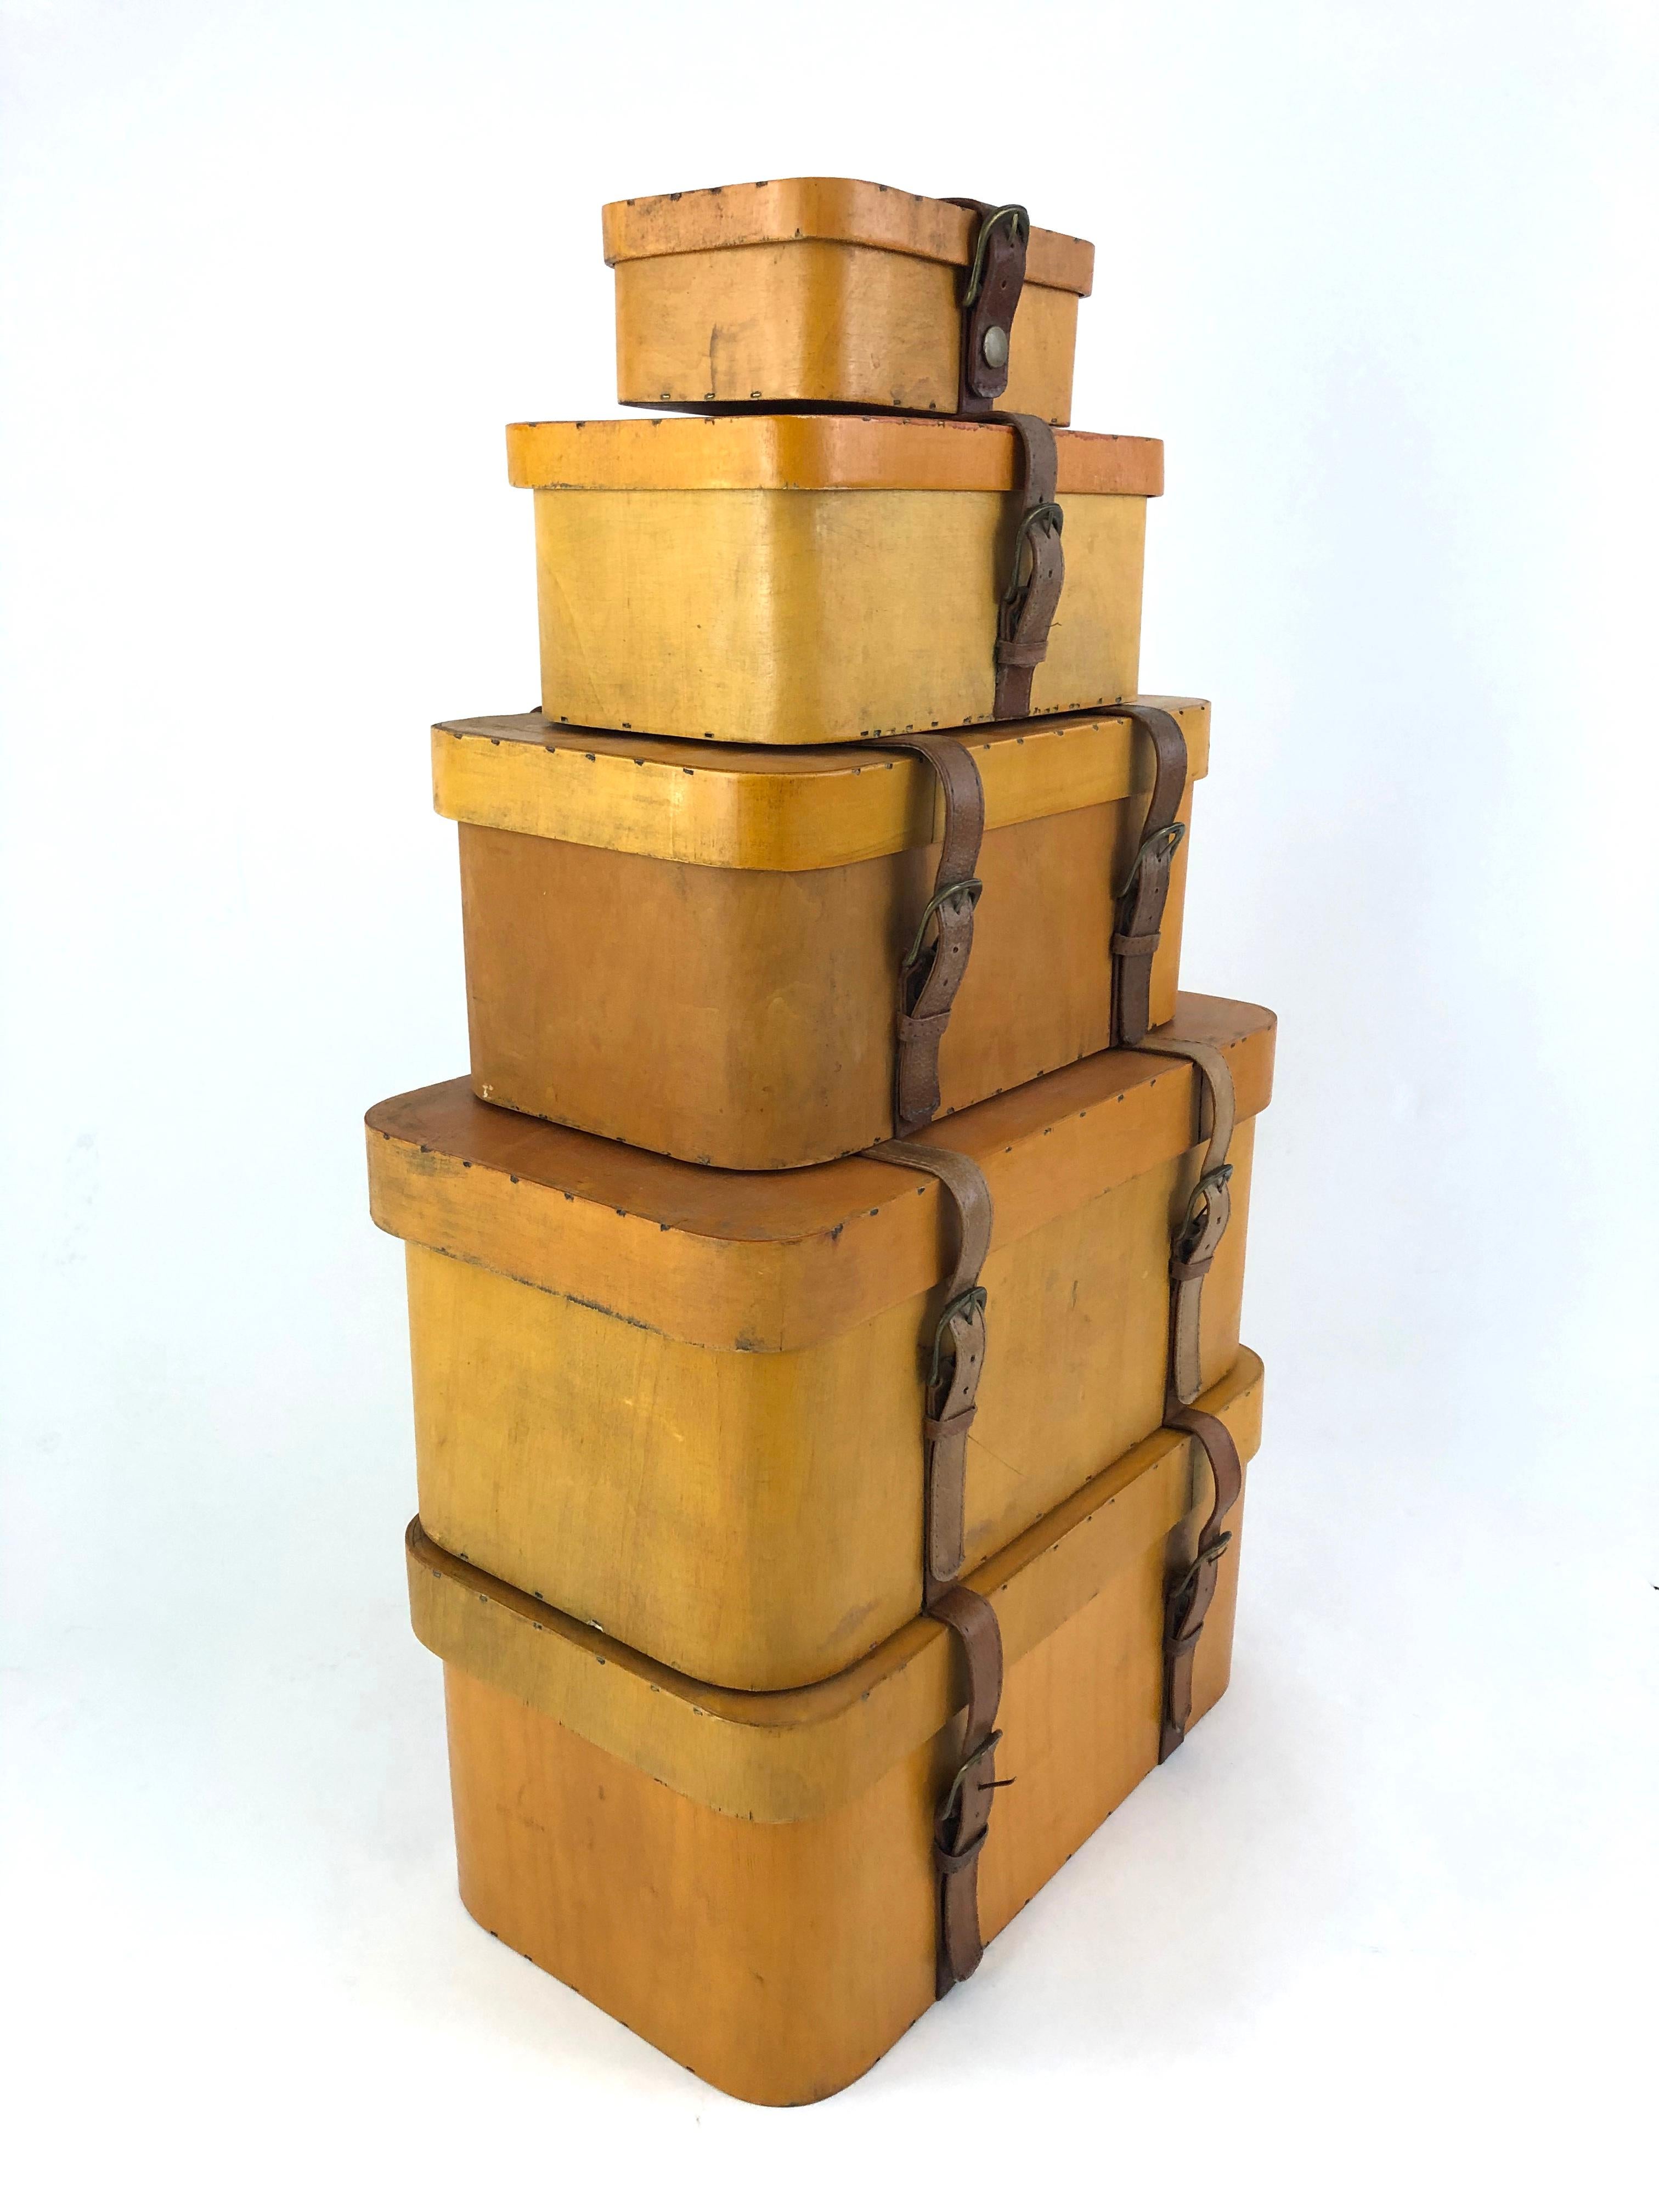 A collection of 5 vintage stacking bentwood birch and leather suitcases, of rectangular form with rounded corners, in graduated sizes. Each with a leather strap and metal buckles, circa 1950s, probably Baltic or Russian. These make for a striking